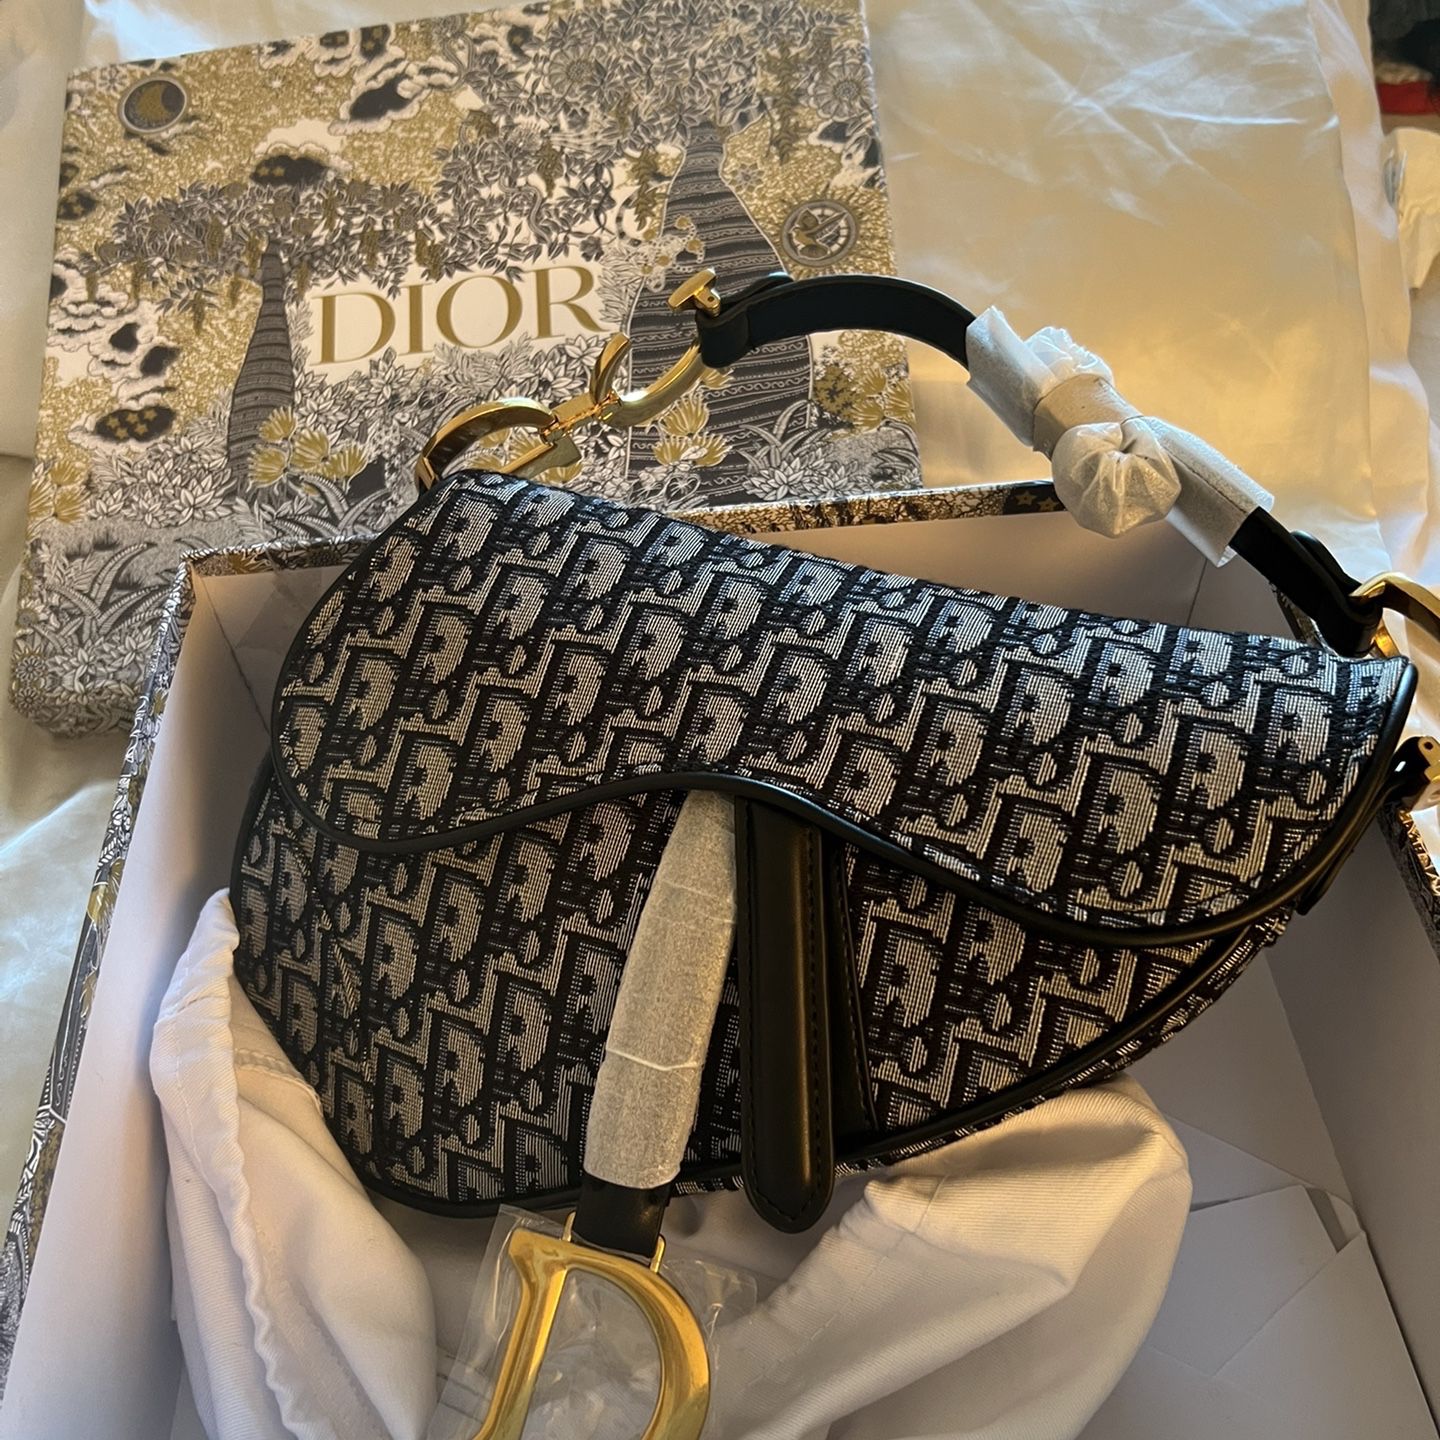 Christian Dior Vintage Diorissimo Double Saddle Bag for Sale in East Point,  GA - OfferUp